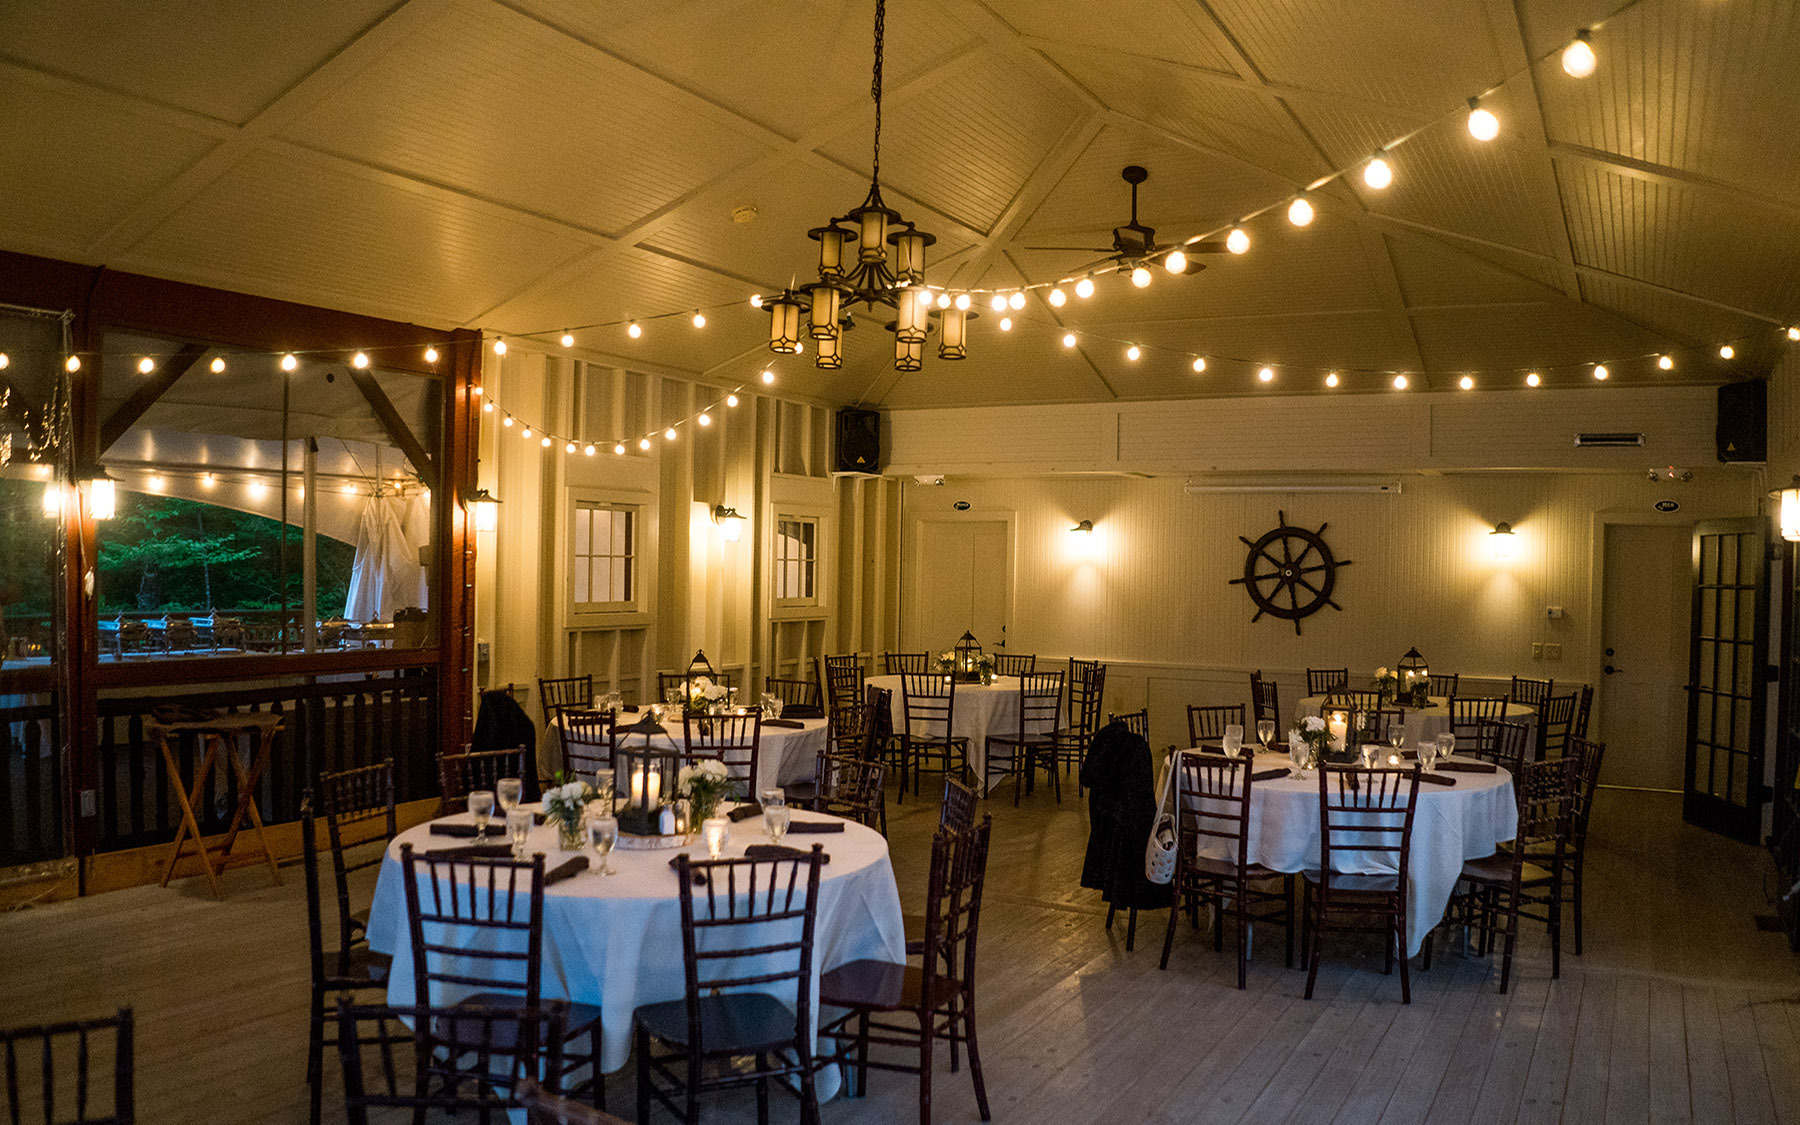 interior of room set for event with white table clothes, lanterns and a ships wheel on the wall.